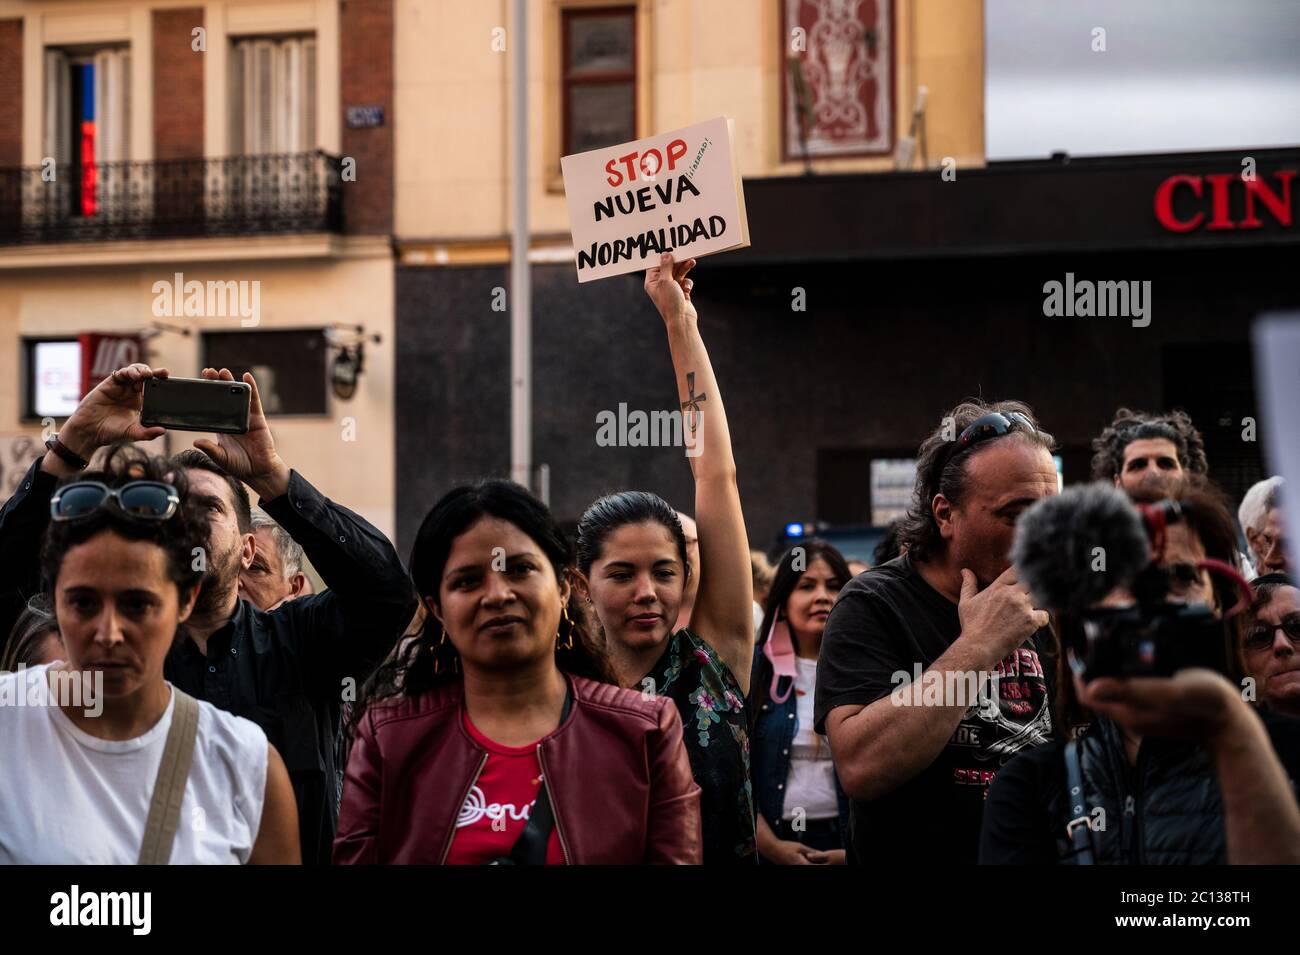 Madrid, Spain. 13th June, 2020. Madrid, Spain. June 13, 2020. A woman protesting against new normality and New World Order conspiracy theory during the coronavirus (COVID-19) crisis. Credit: Marcos del Mazo/Alamy Live News Stock Photo